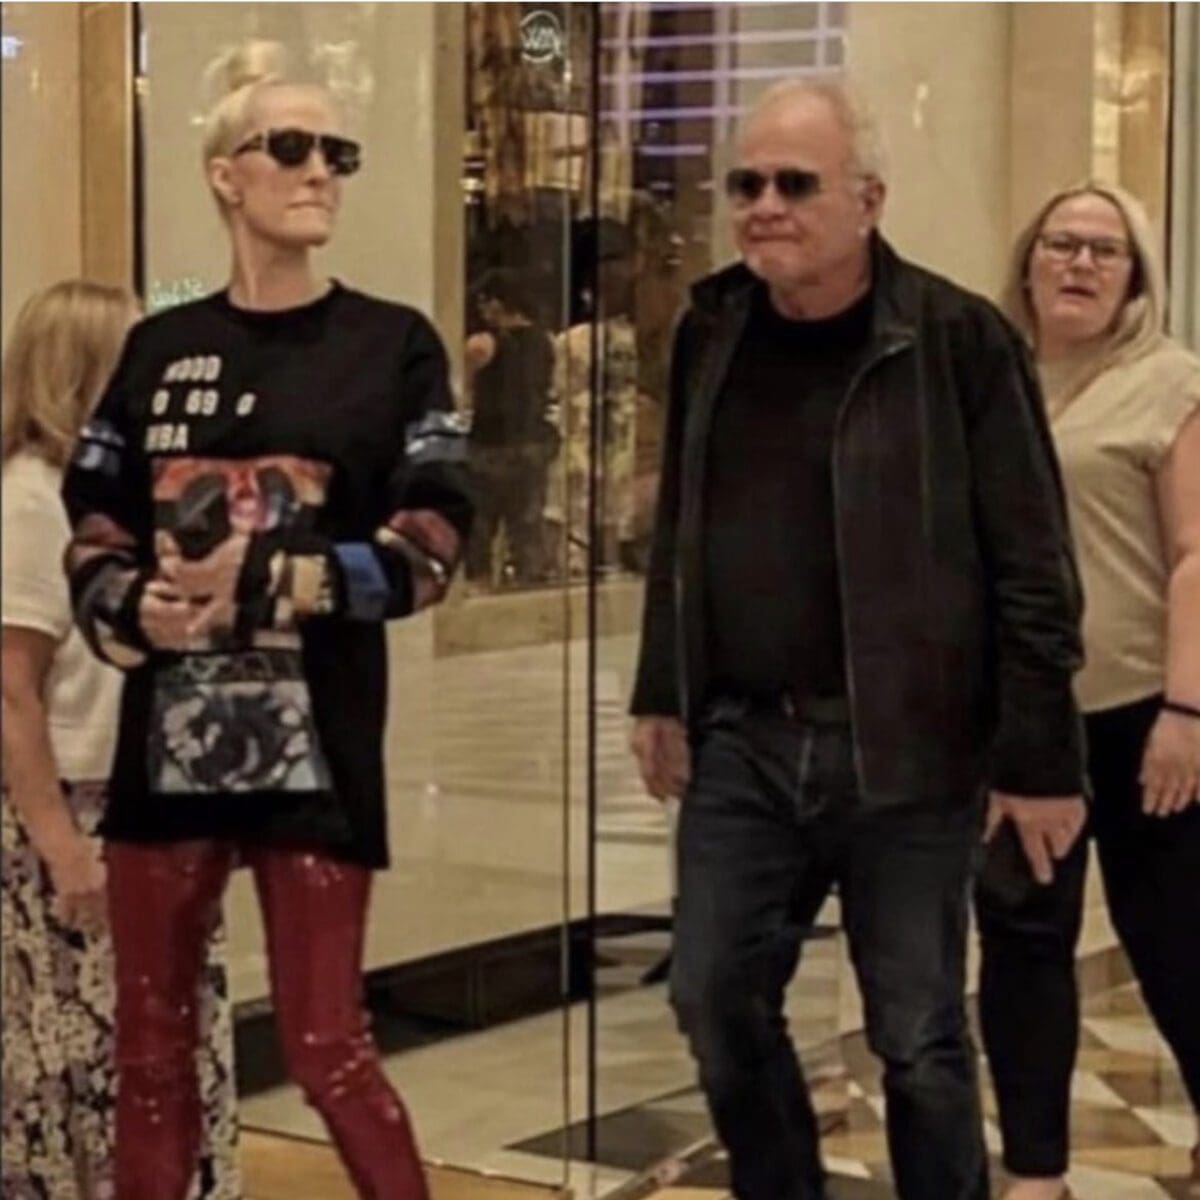 Erika Jayne spotted out and about with her new man, Jim Wilkes.